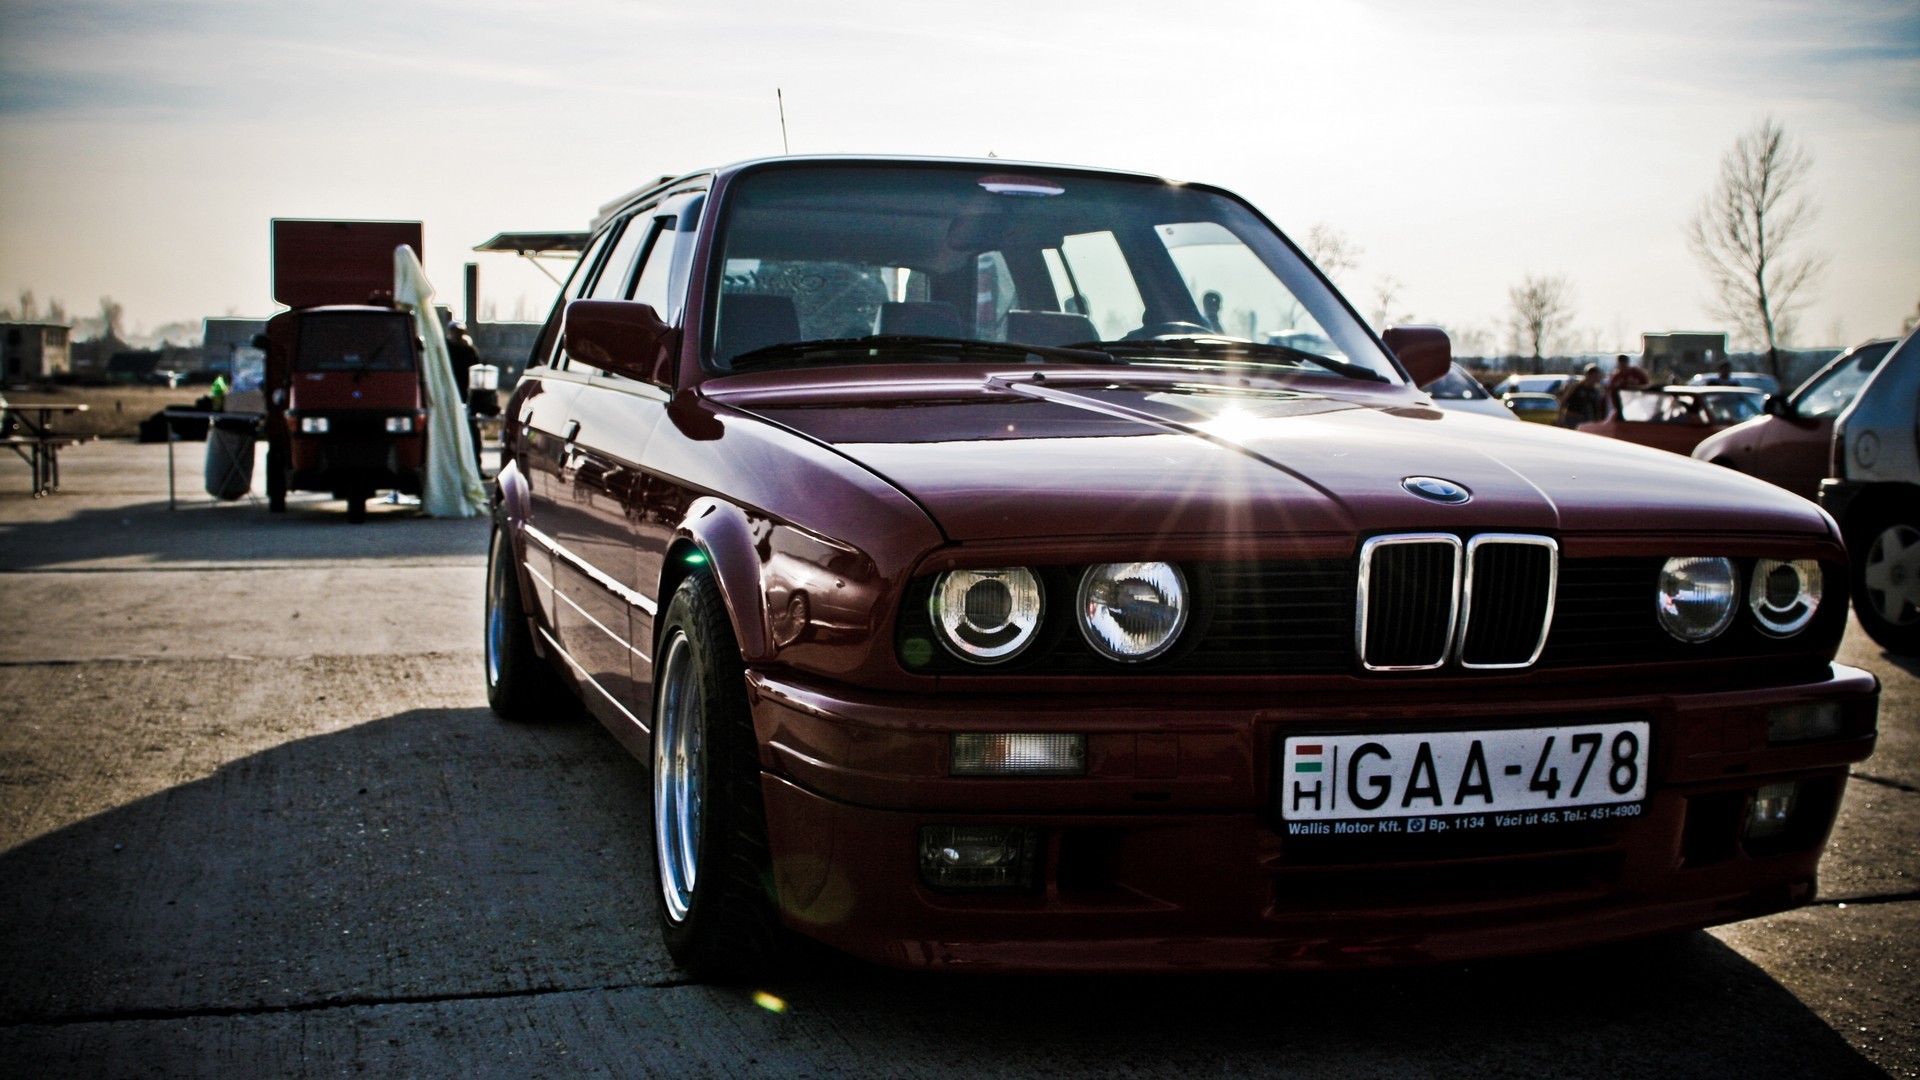 47778 2560x1600 PC pictures for free, download bmw, transport, auto 2560x1600 wallpapers on your desktop